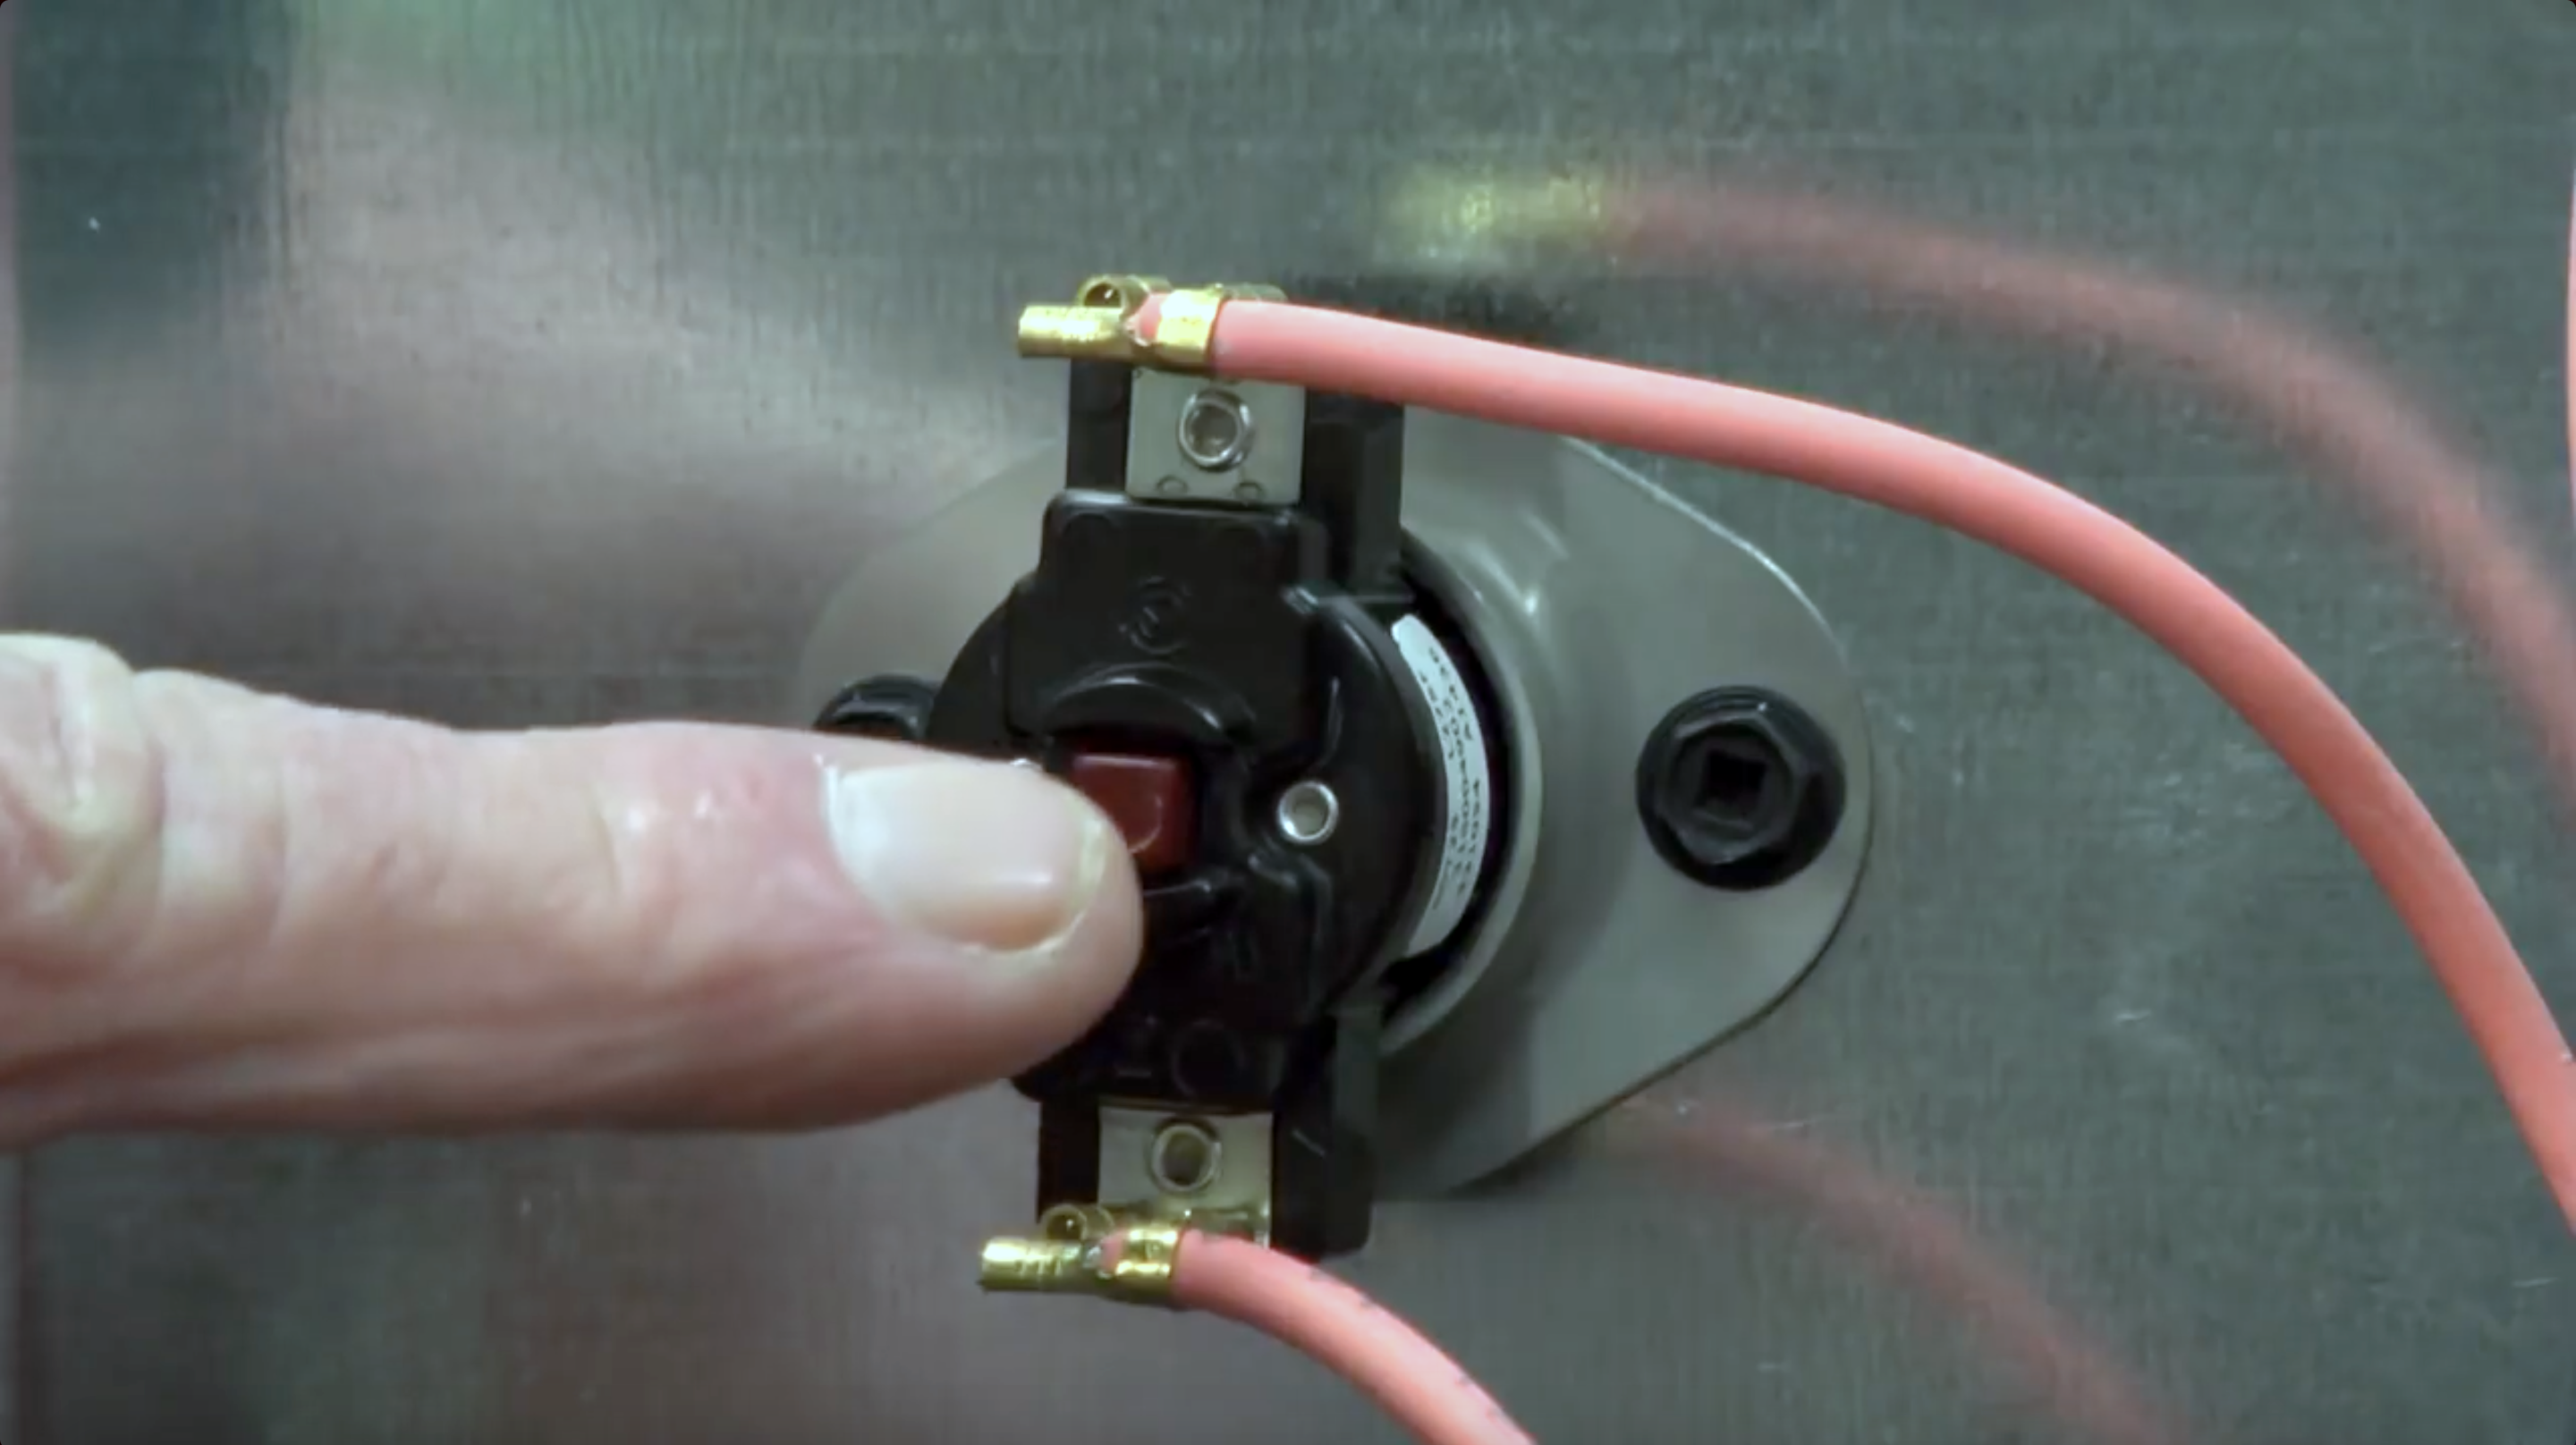 How To Tell If A Thermal Fuse Is Bad How to replace a wall oven thermal fuse | Repair guide